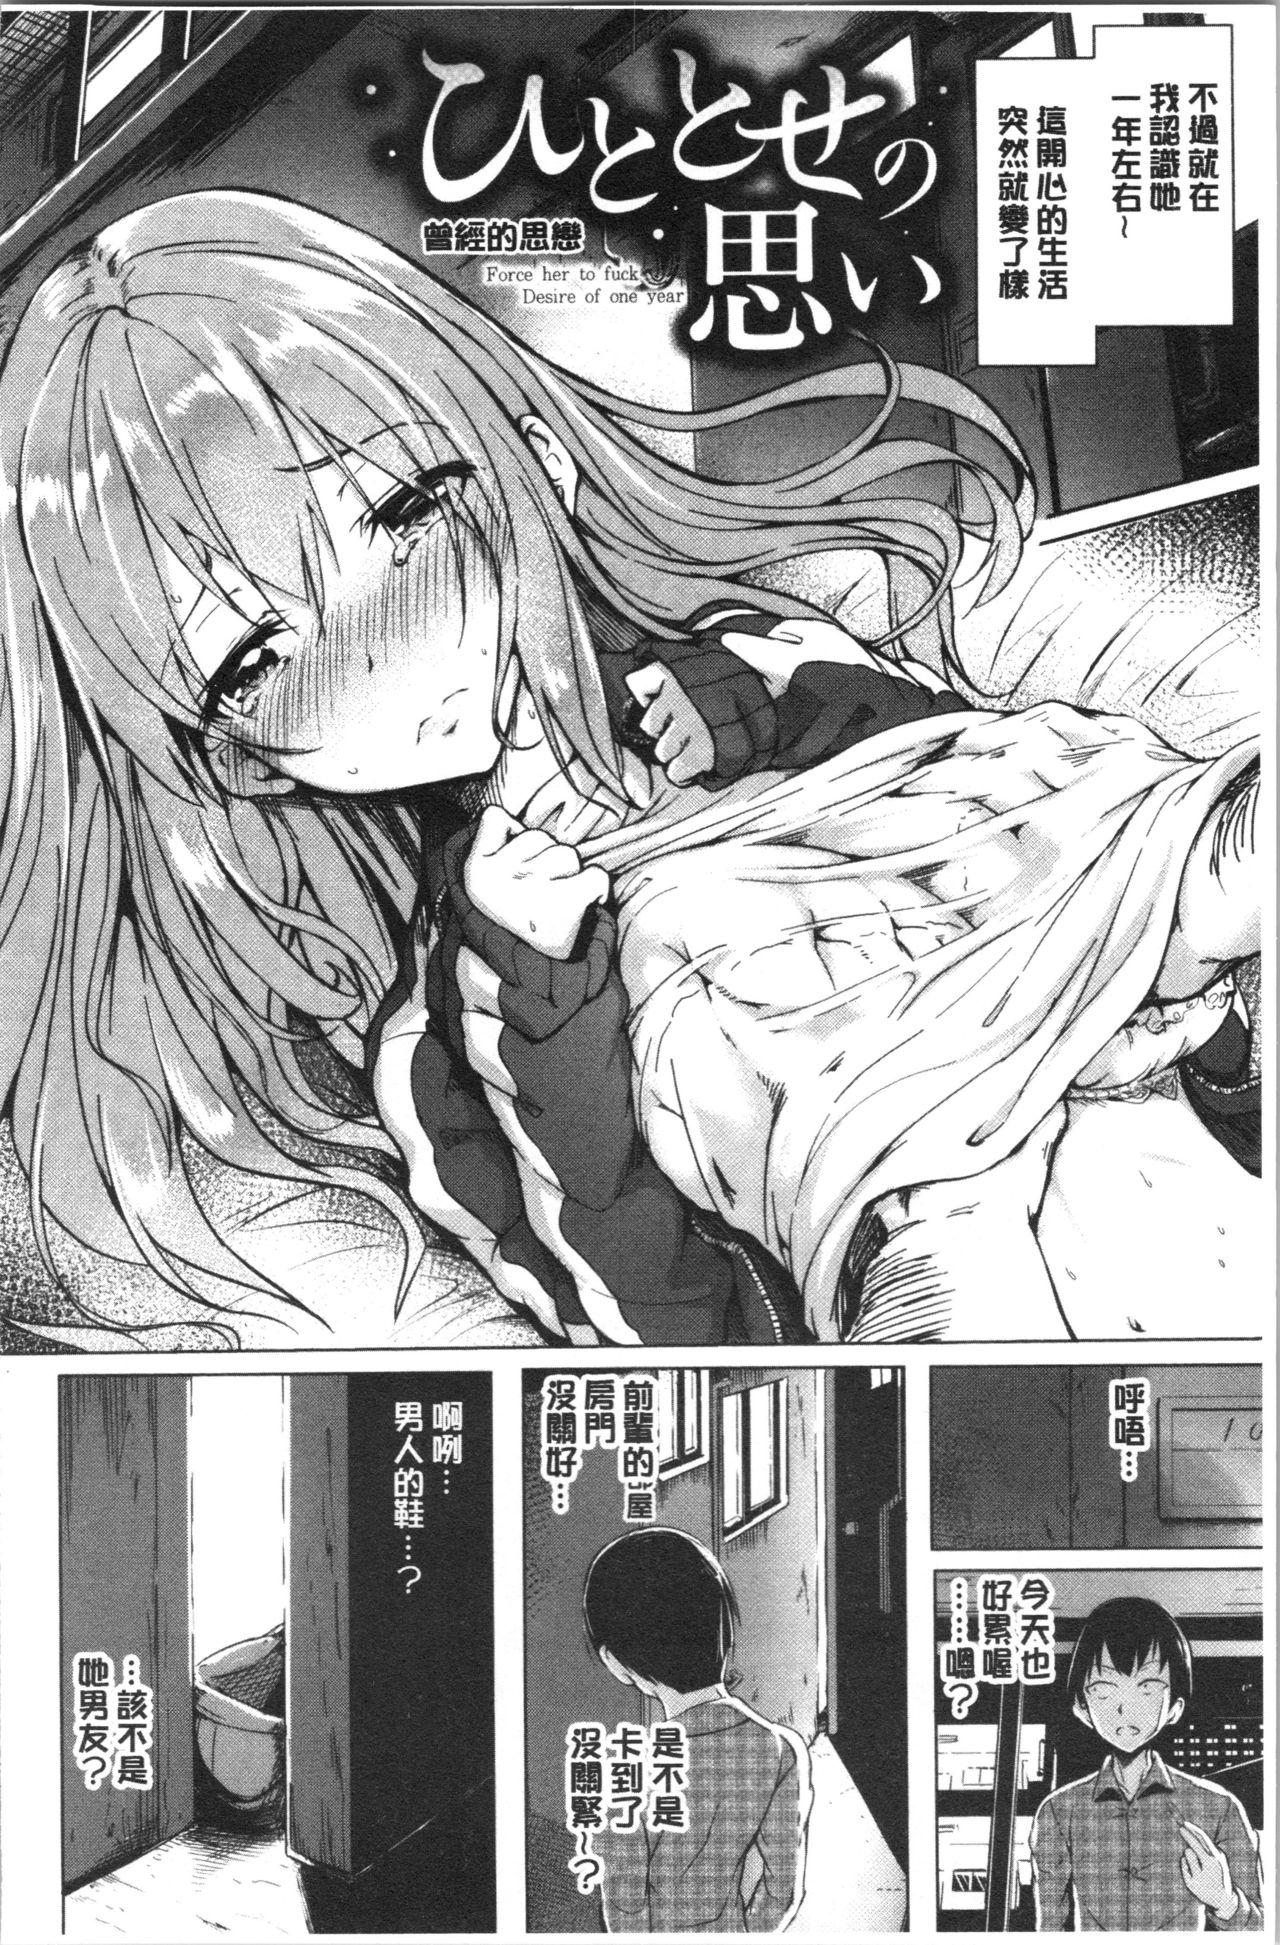 Oral Sex Period | 姦淫期間 Sexy Girl Sex - Page 6